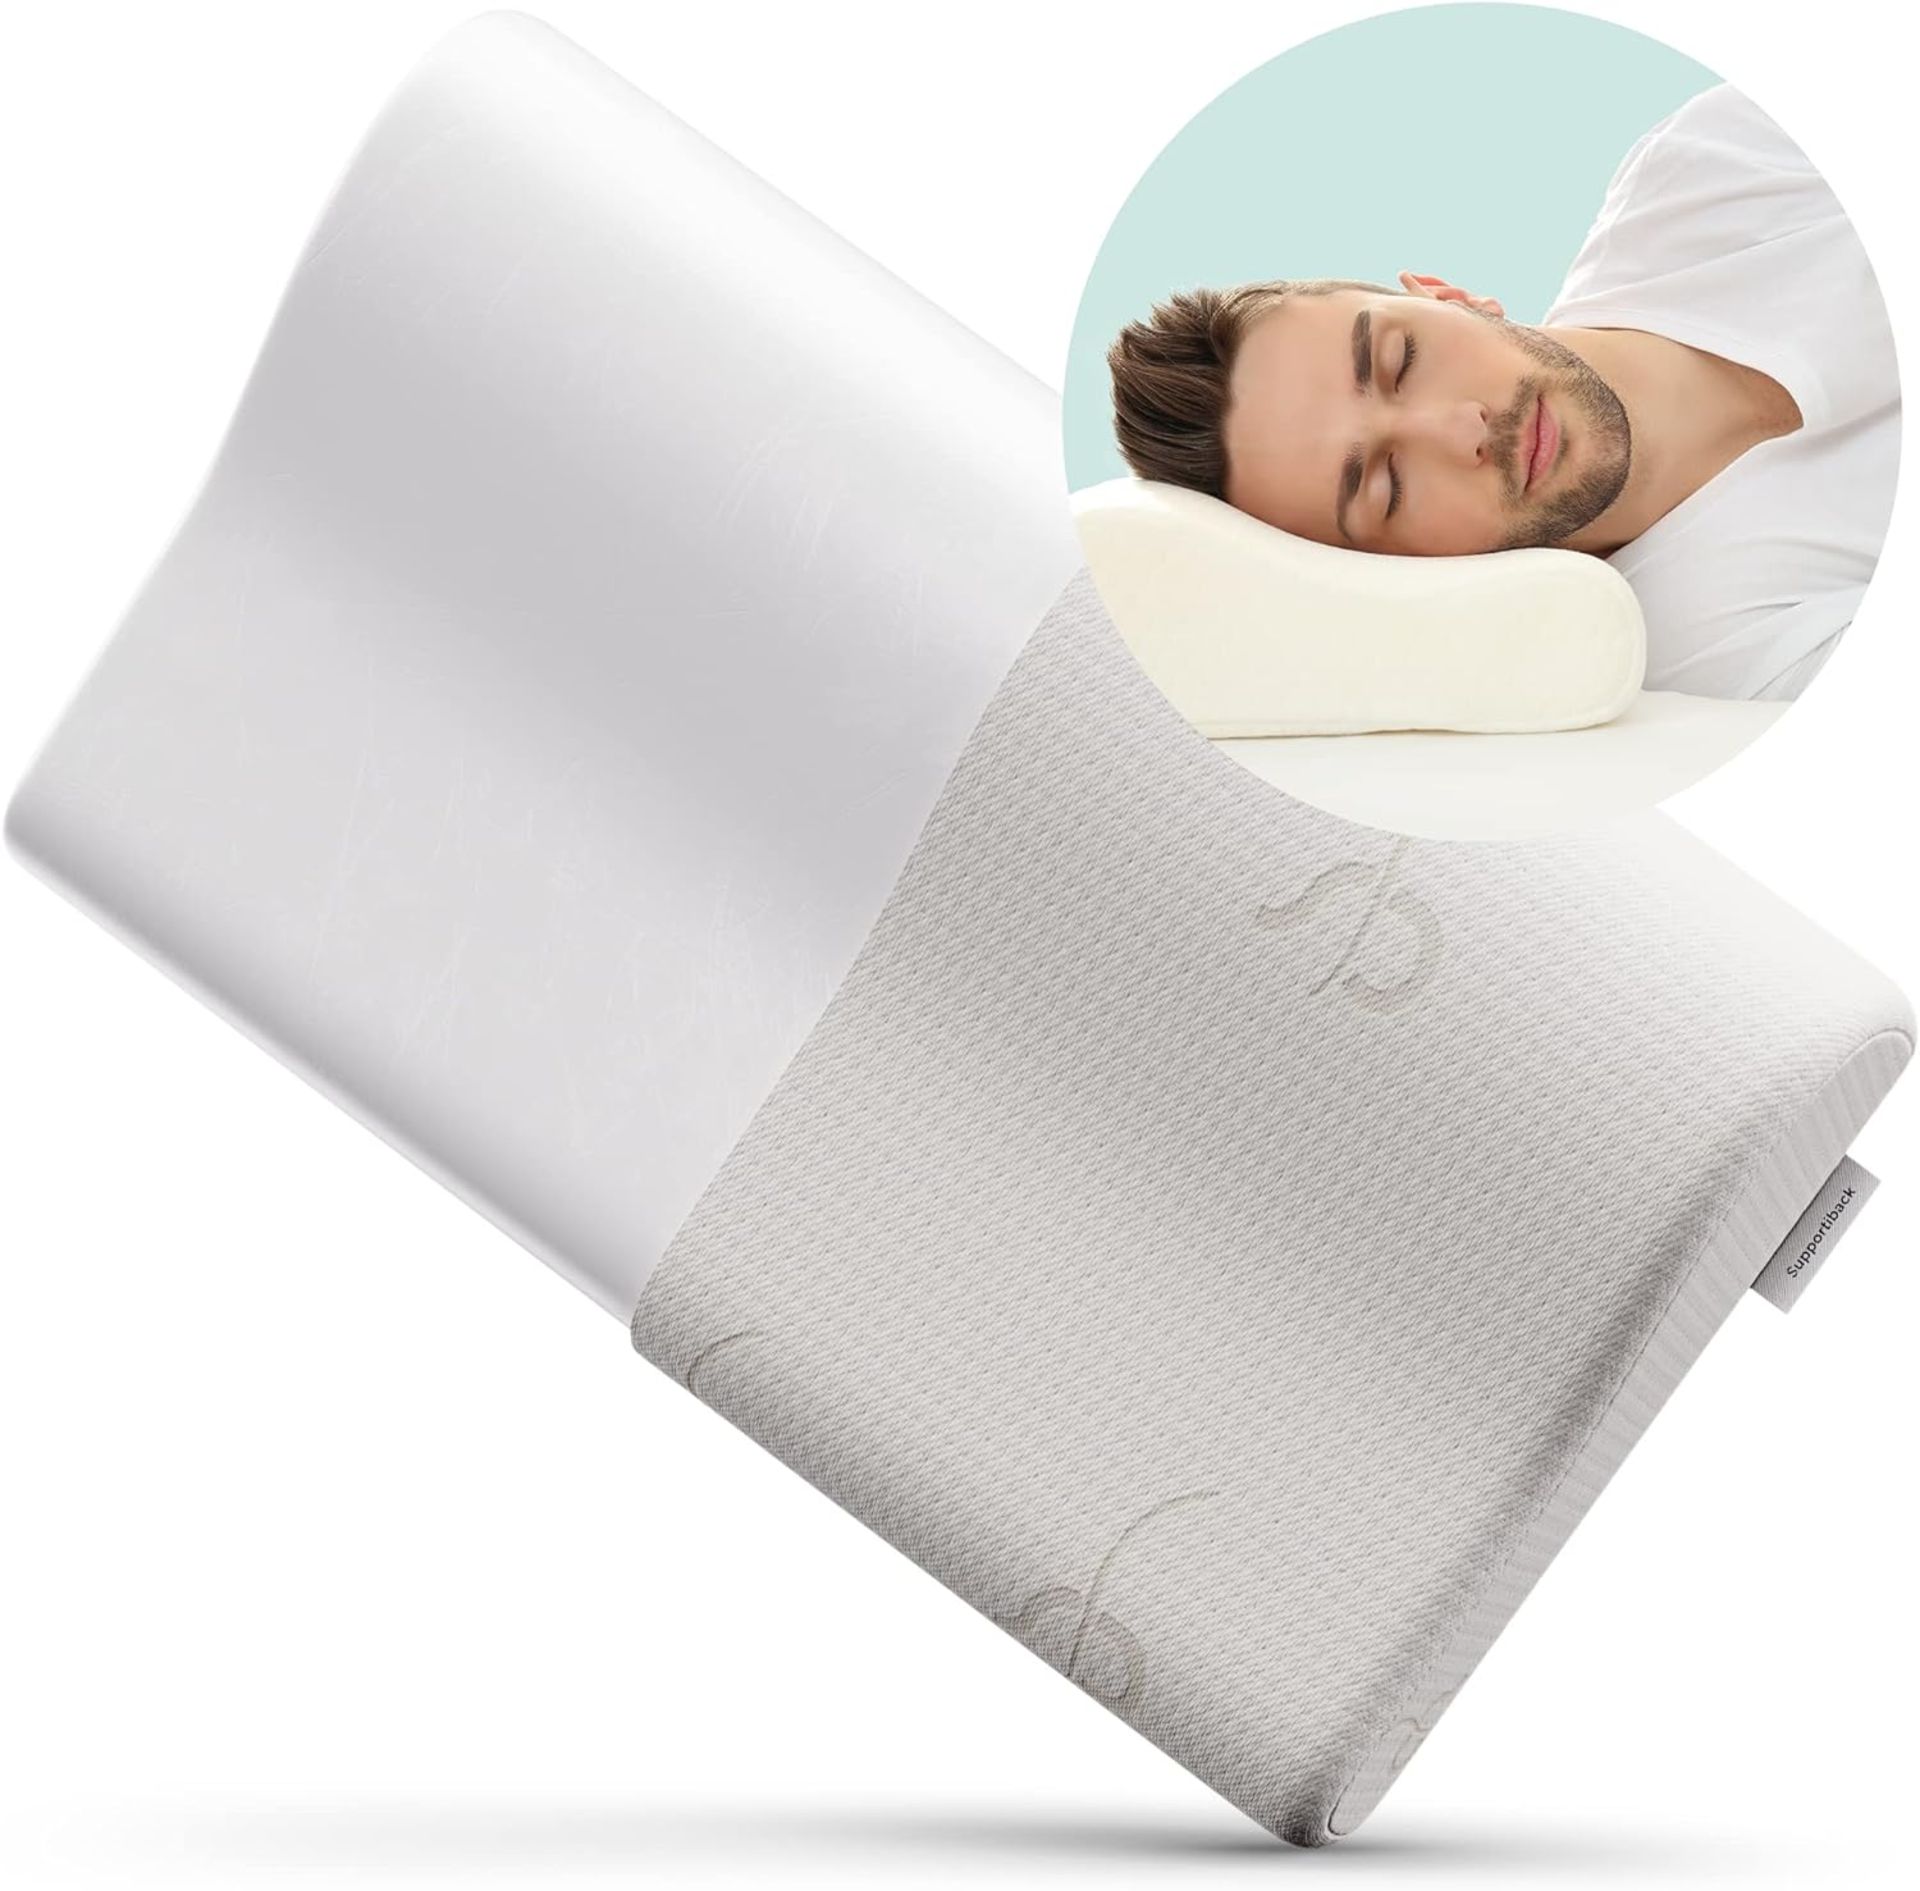 RRP £24.99 Doctor-Designed Orthopedic Pillow - Cool Feel with Patented Antibacterial, Breathable